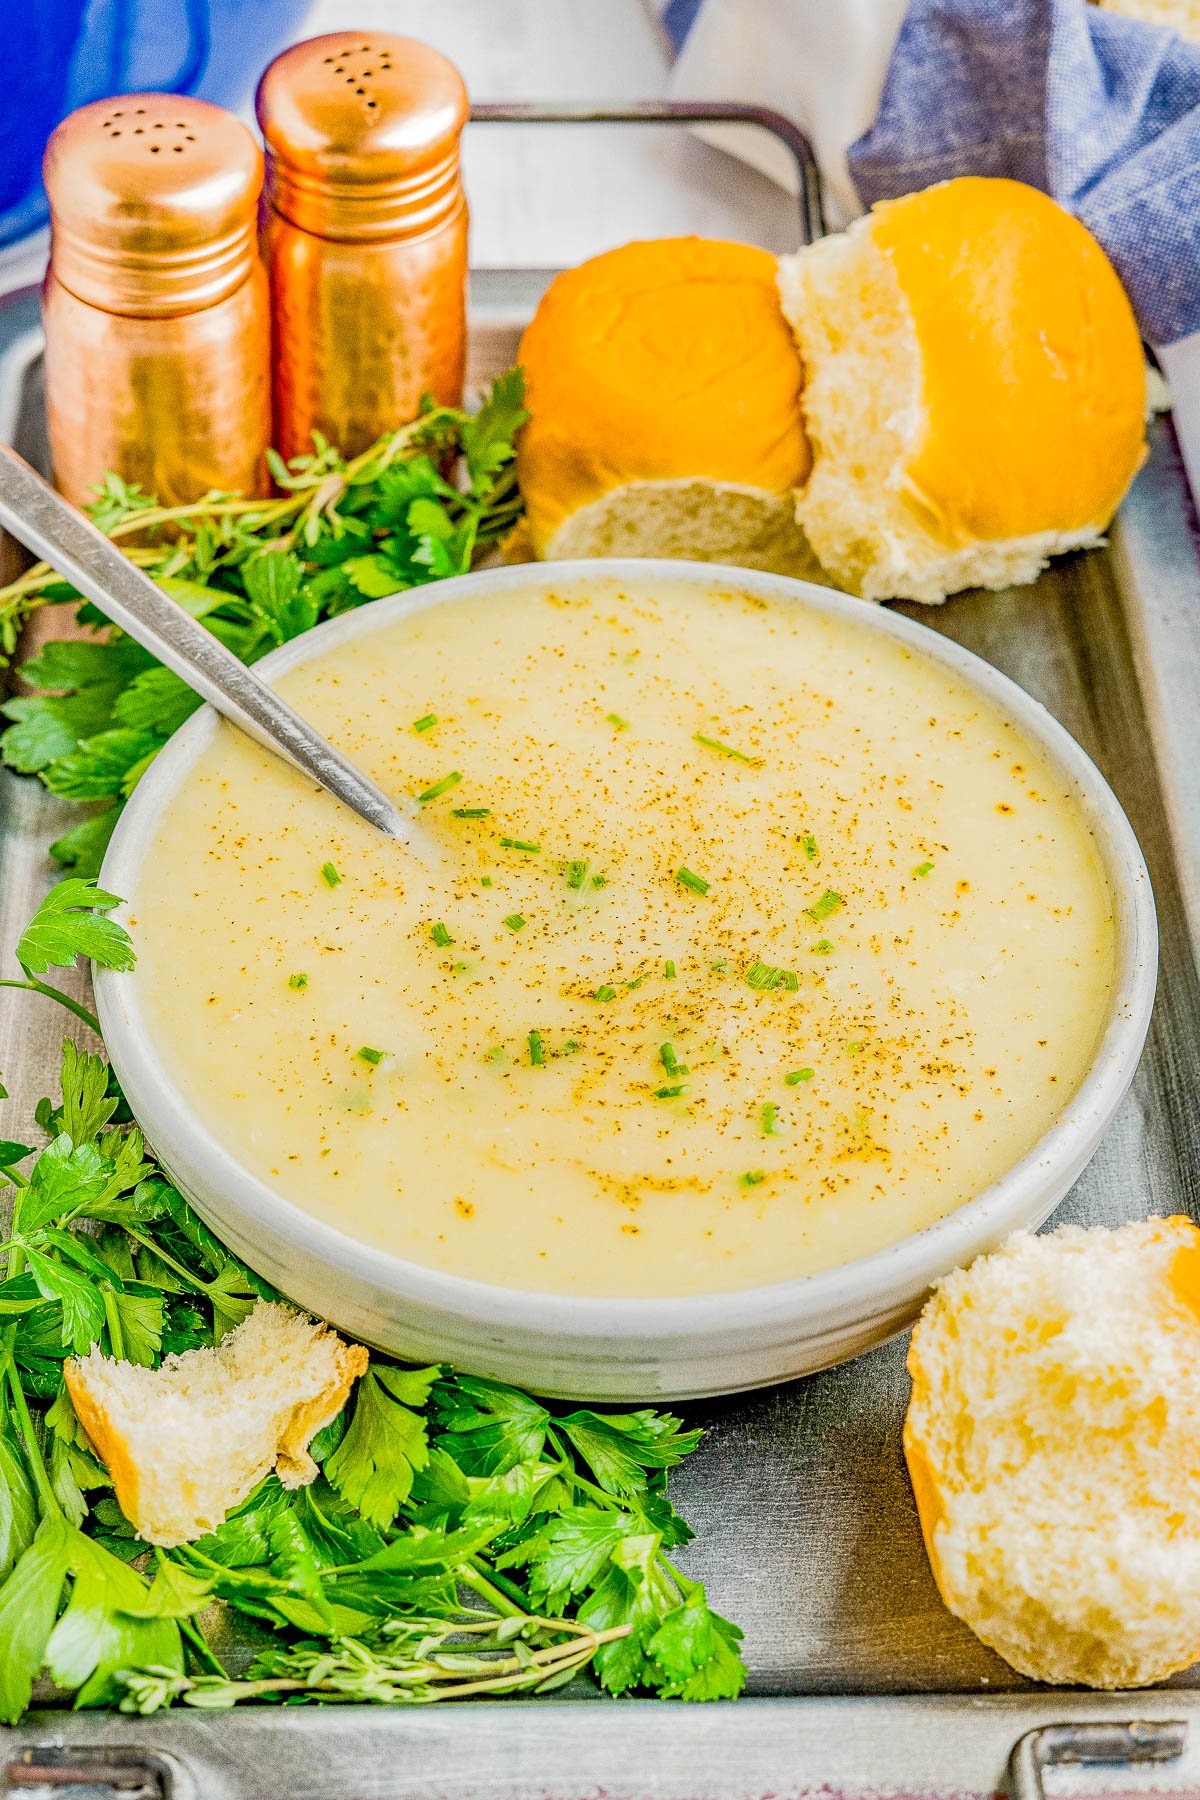 Easy Potato Leek Soup - Learn how to make this classic soup recipe that's ready in 30 minutes! Made in one pot with simple ingredients. A hearty comfort food soup that's just creamy enough without being too heavy. A crowd-favorite recipe for the BEST and EASIEST potato leek soup!